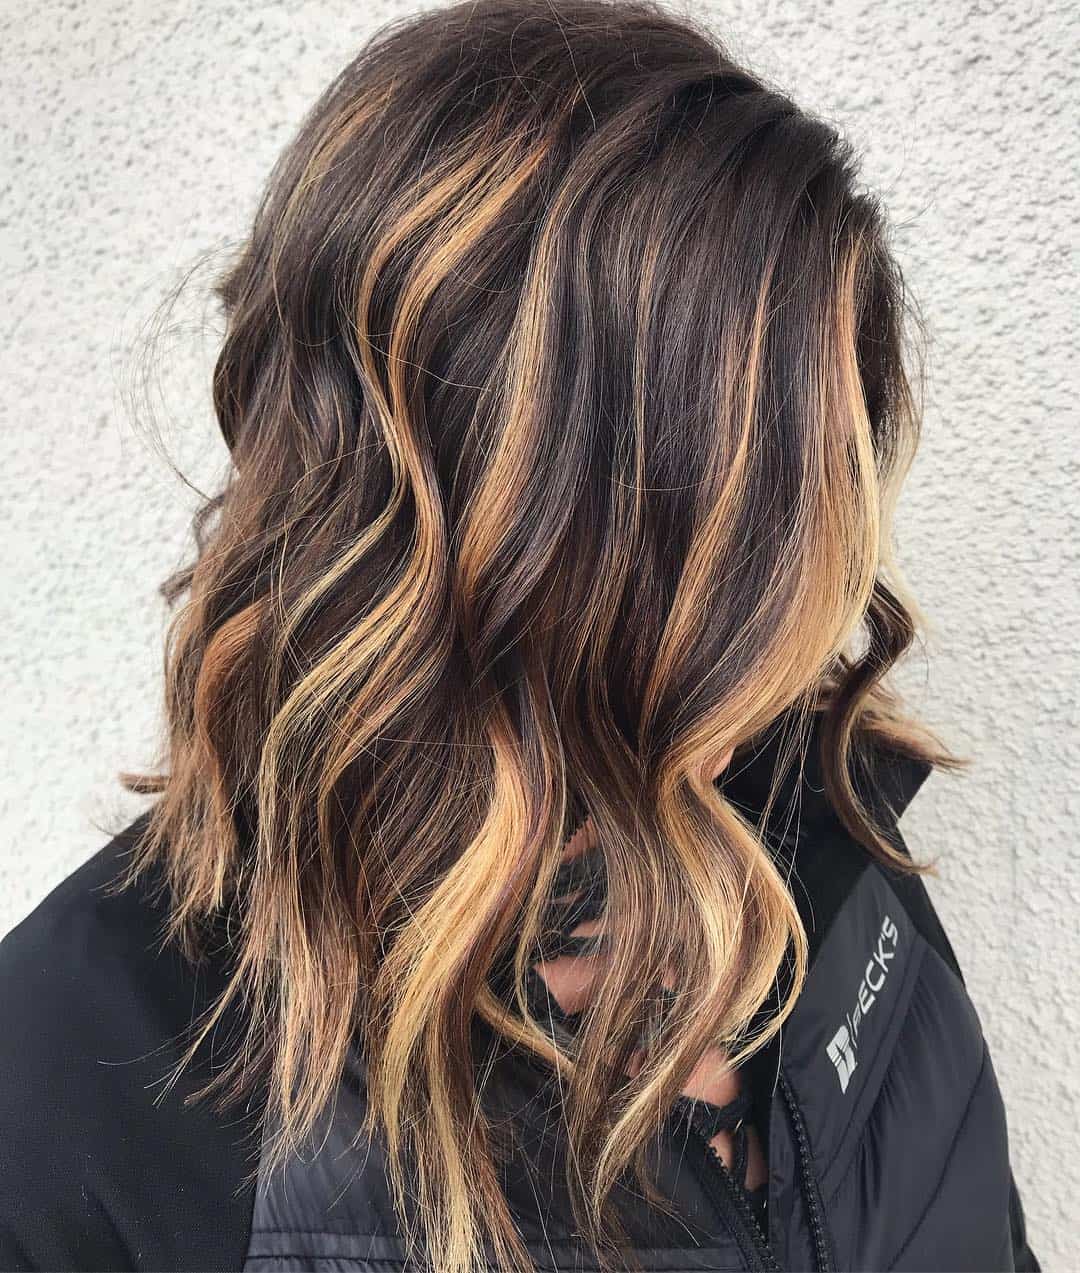 28 Gorgeous Brown Hairstyles With Striking Blonde Highlights